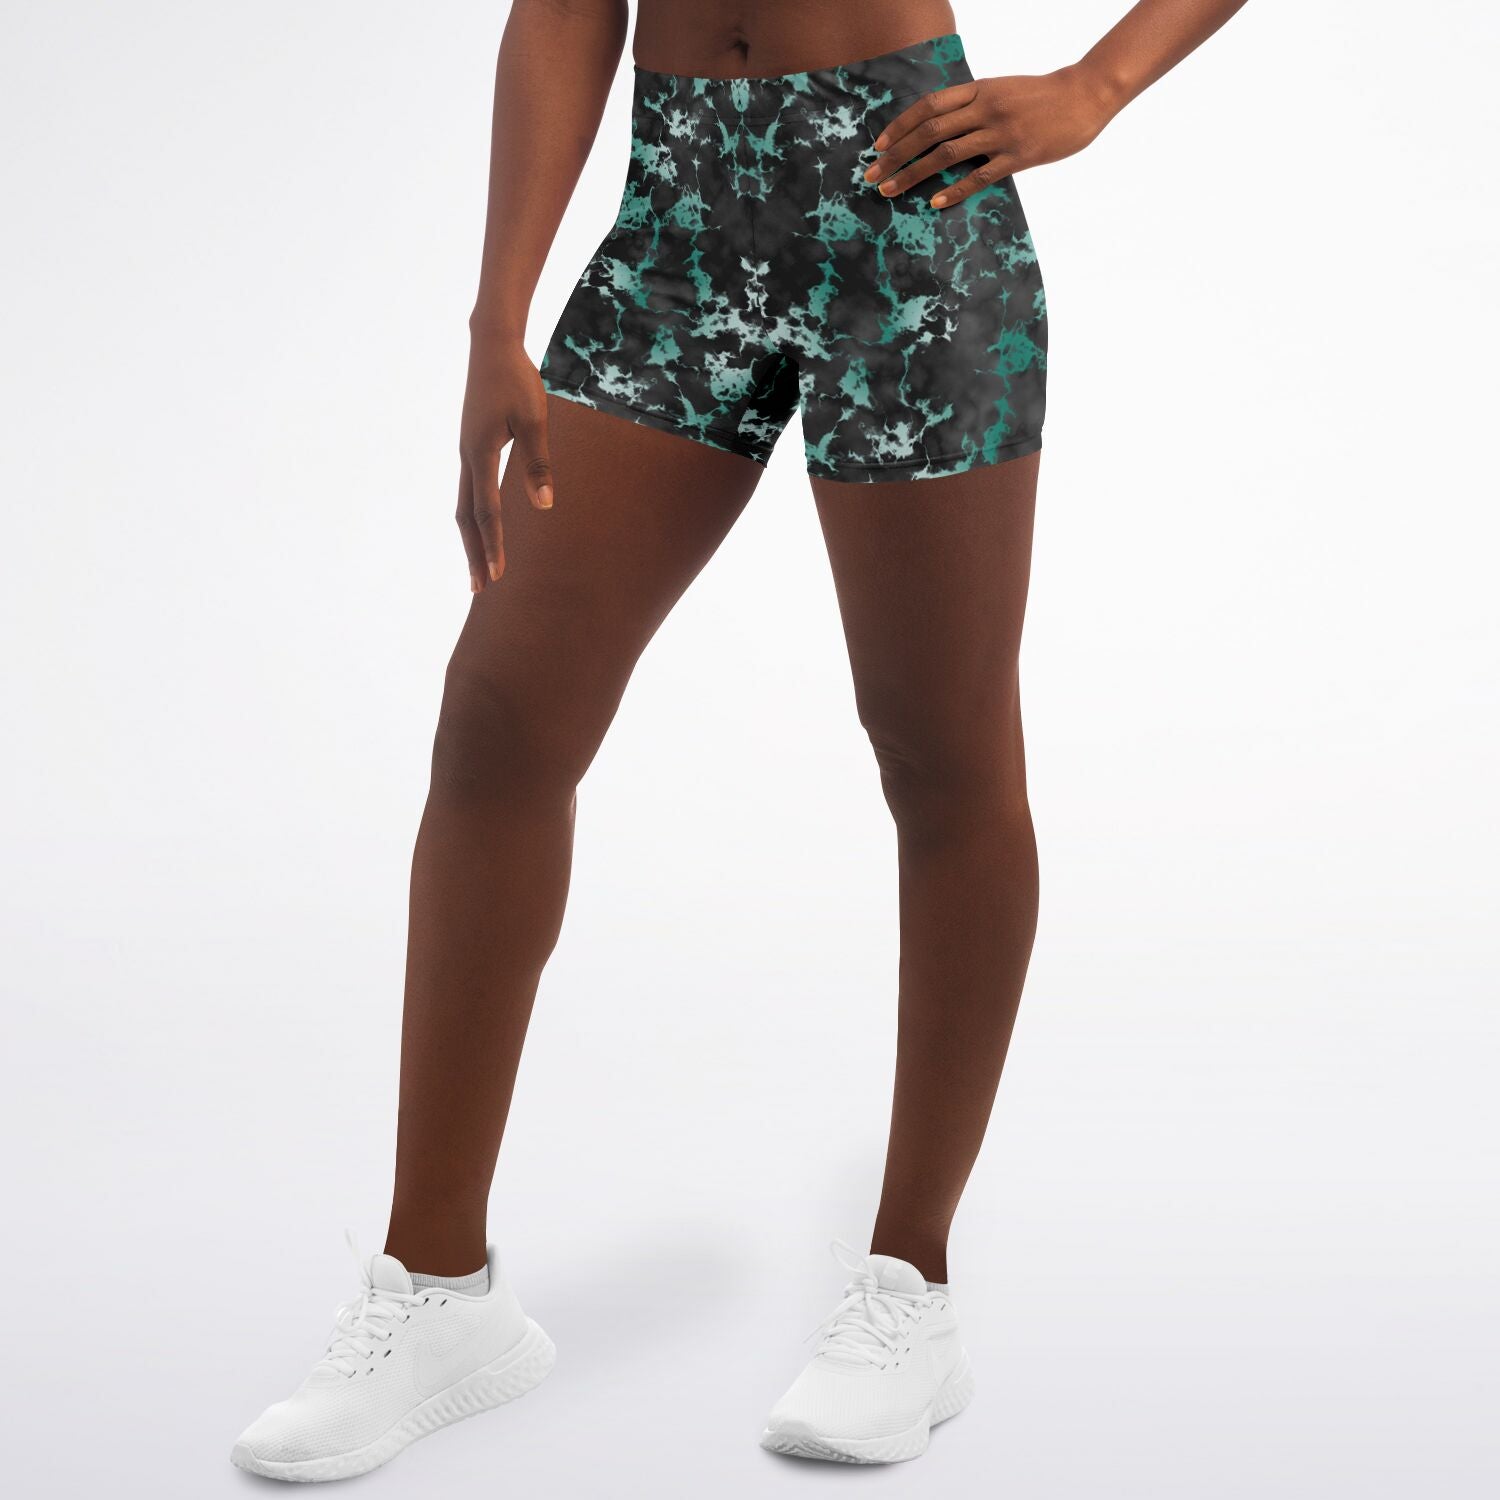 Women's Mid-rise Black Green Gilded Marble Athletic Booty Shorts